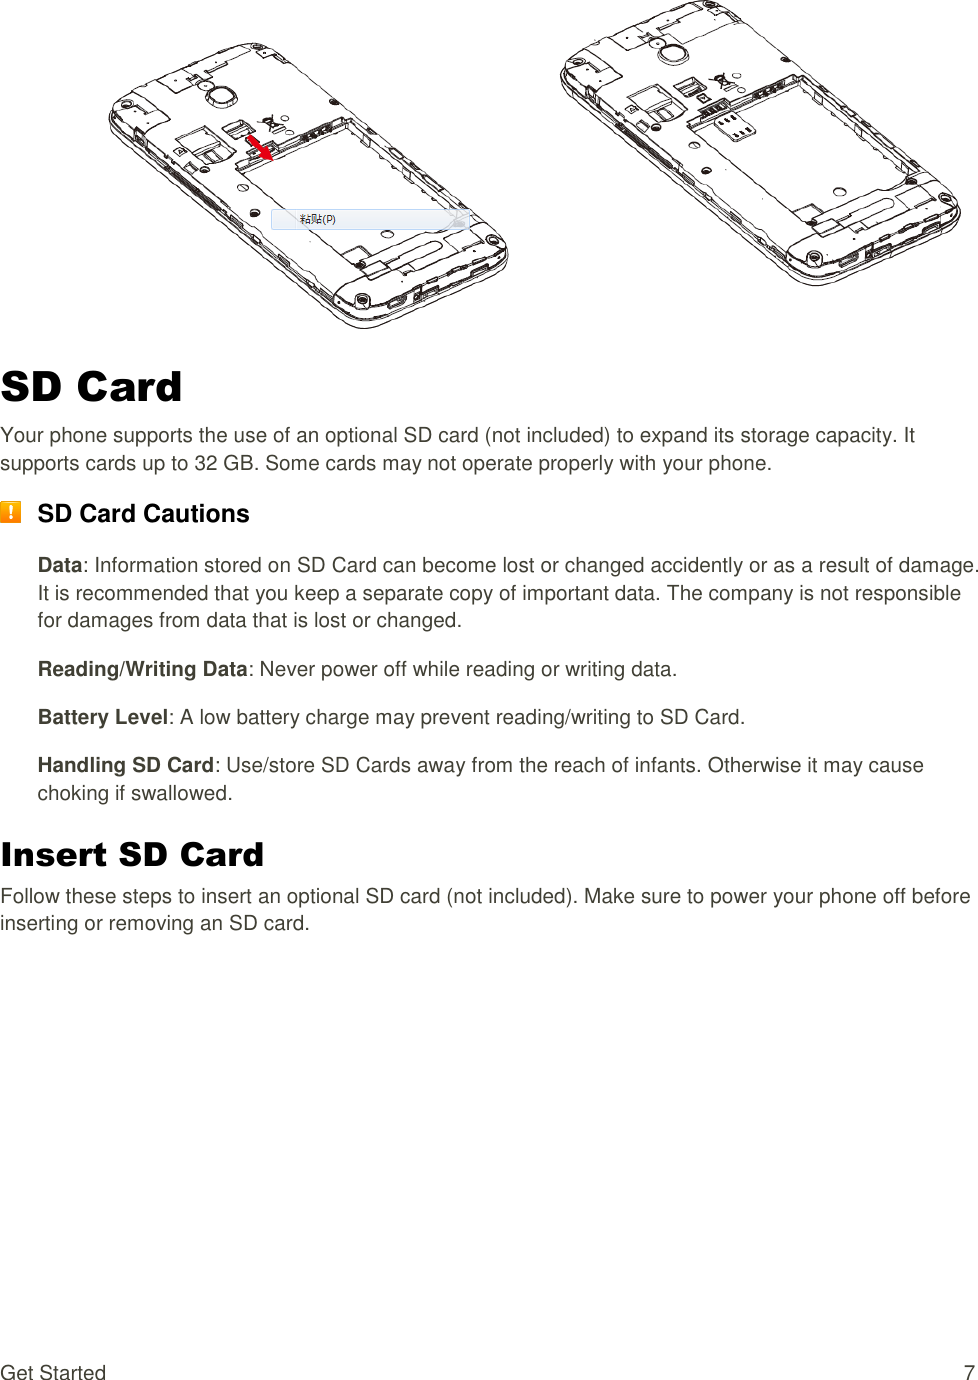 Get Started  7   SD Card Your phone supports the use of an optional SD card (not included) to expand its storage capacity. It supports cards up to 32 GB. Some cards may not operate properly with your phone.  SD Card Cautions Data: Information stored on SD Card can become lost or changed accidently or as a result of damage. It is recommended that you keep a separate copy of important data. The company is not responsible for damages from data that is lost or changed. Reading/Writing Data: Never power off while reading or writing data. Battery Level: A low battery charge may prevent reading/writing to SD Card. Handling SD Card: Use/store SD Cards away from the reach of infants. Otherwise it may cause choking if swallowed. Insert SD Card Follow these steps to insert an optional SD card (not included). Make sure to power your phone off before inserting or removing an SD card. 